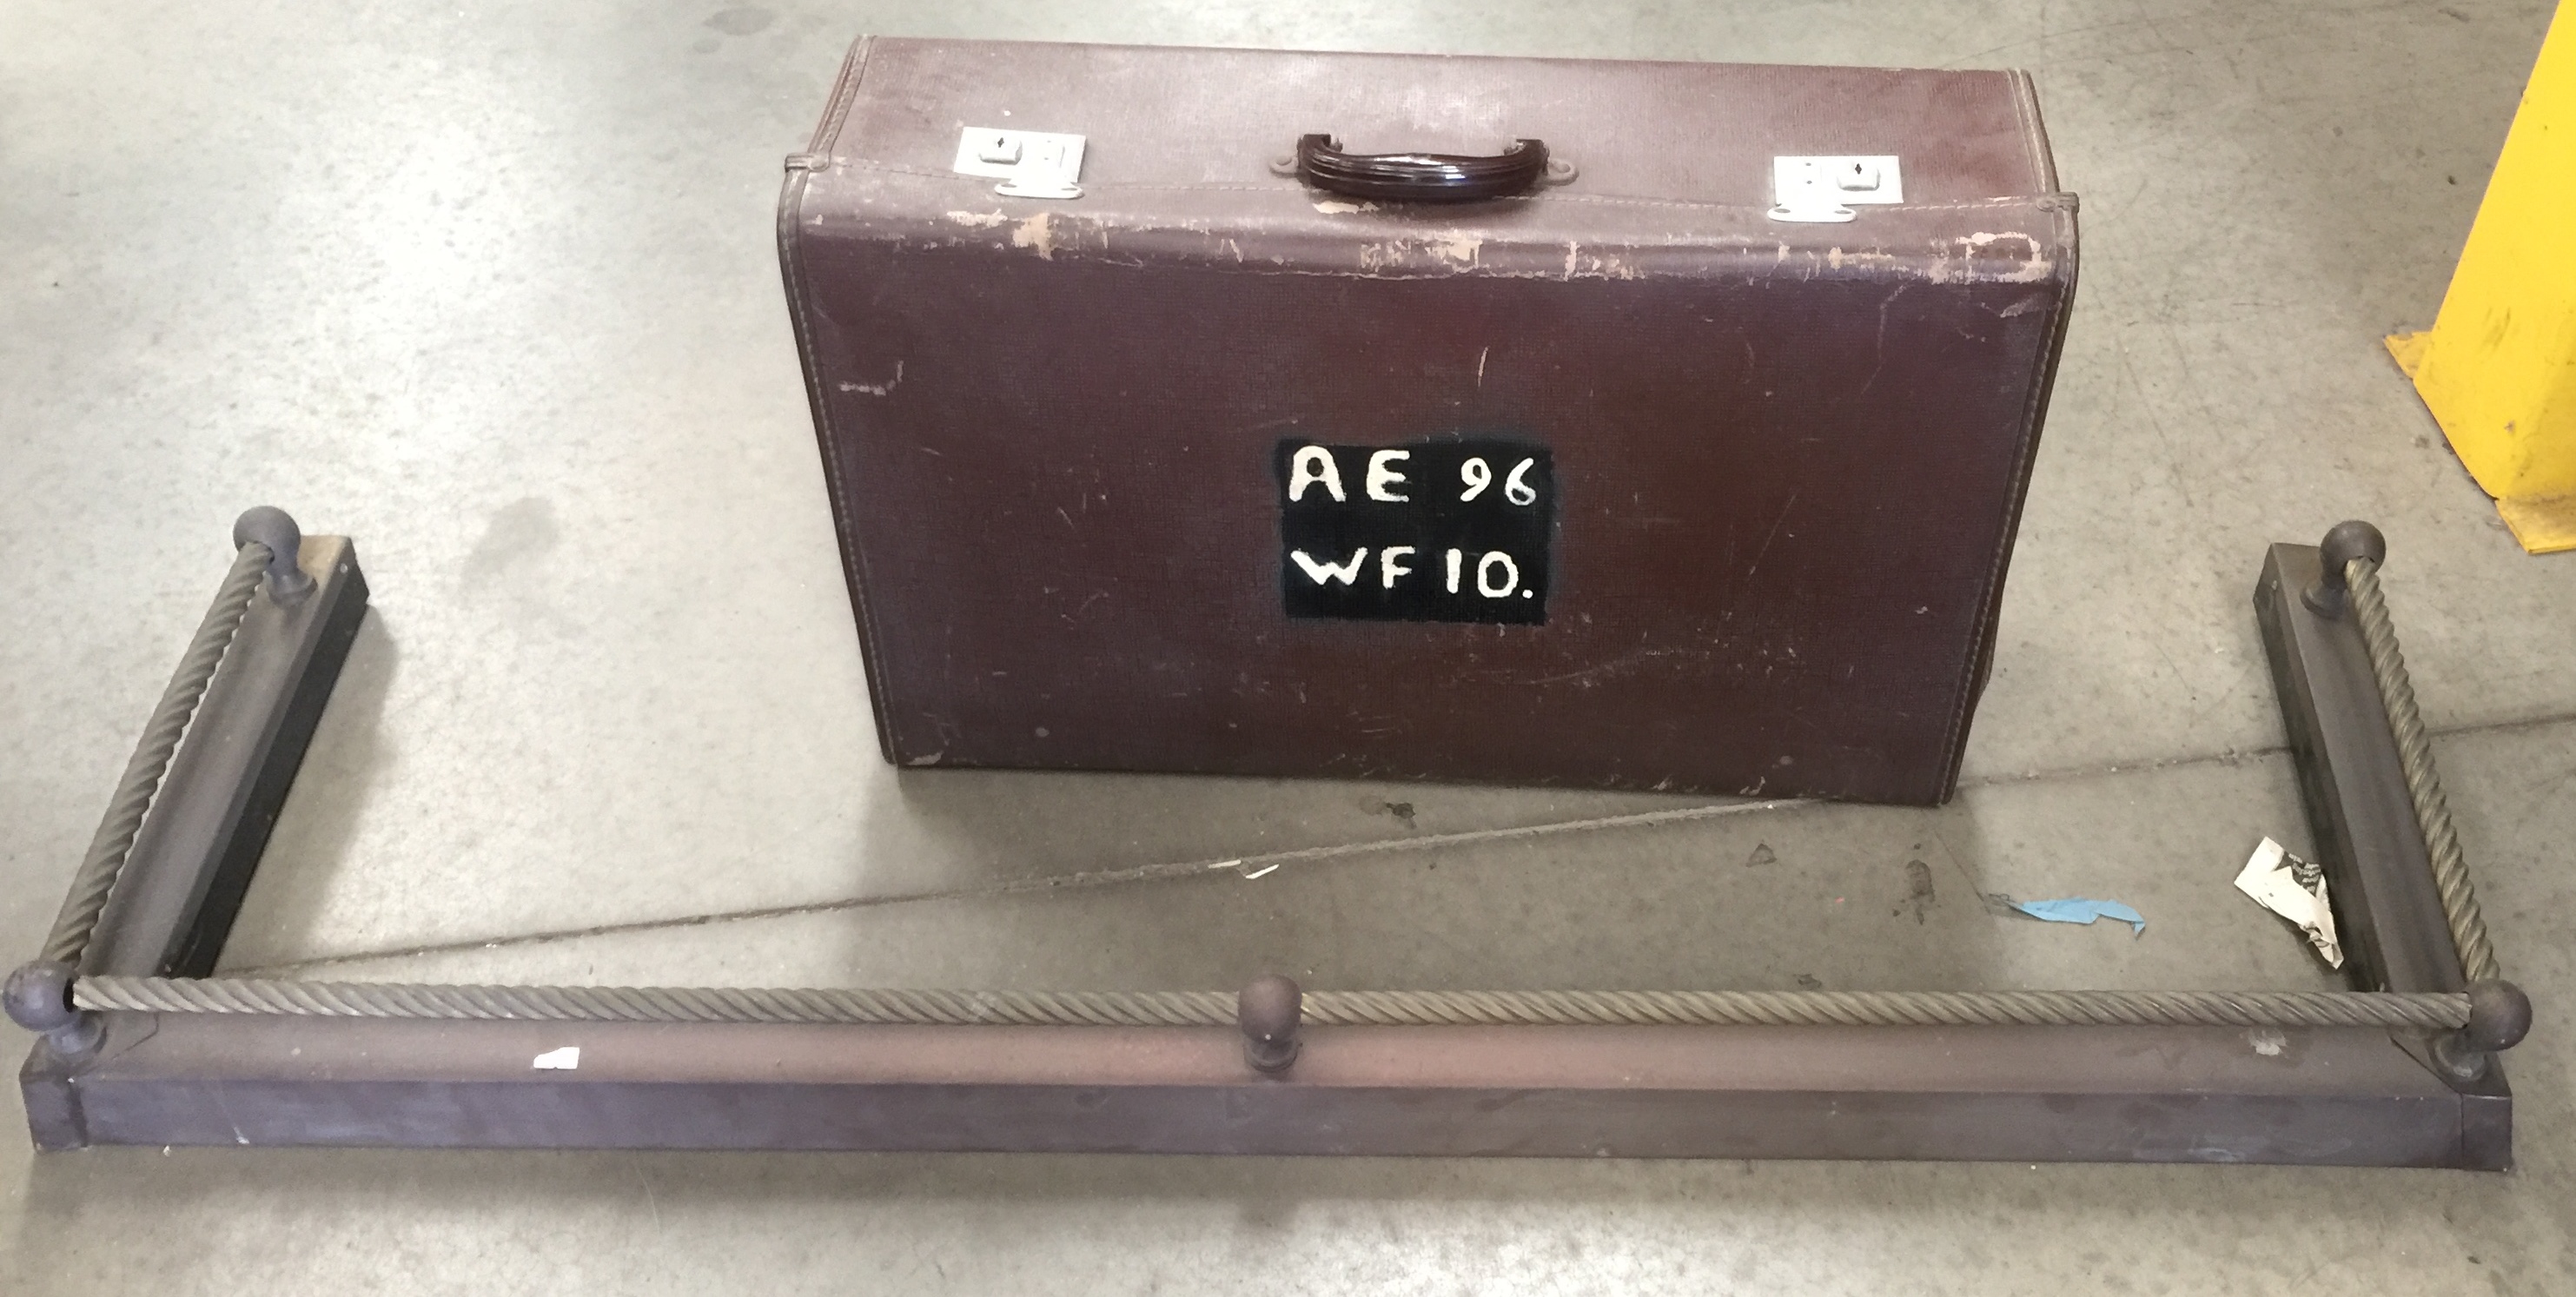 2 x items - a brass fire fender and a suitcase